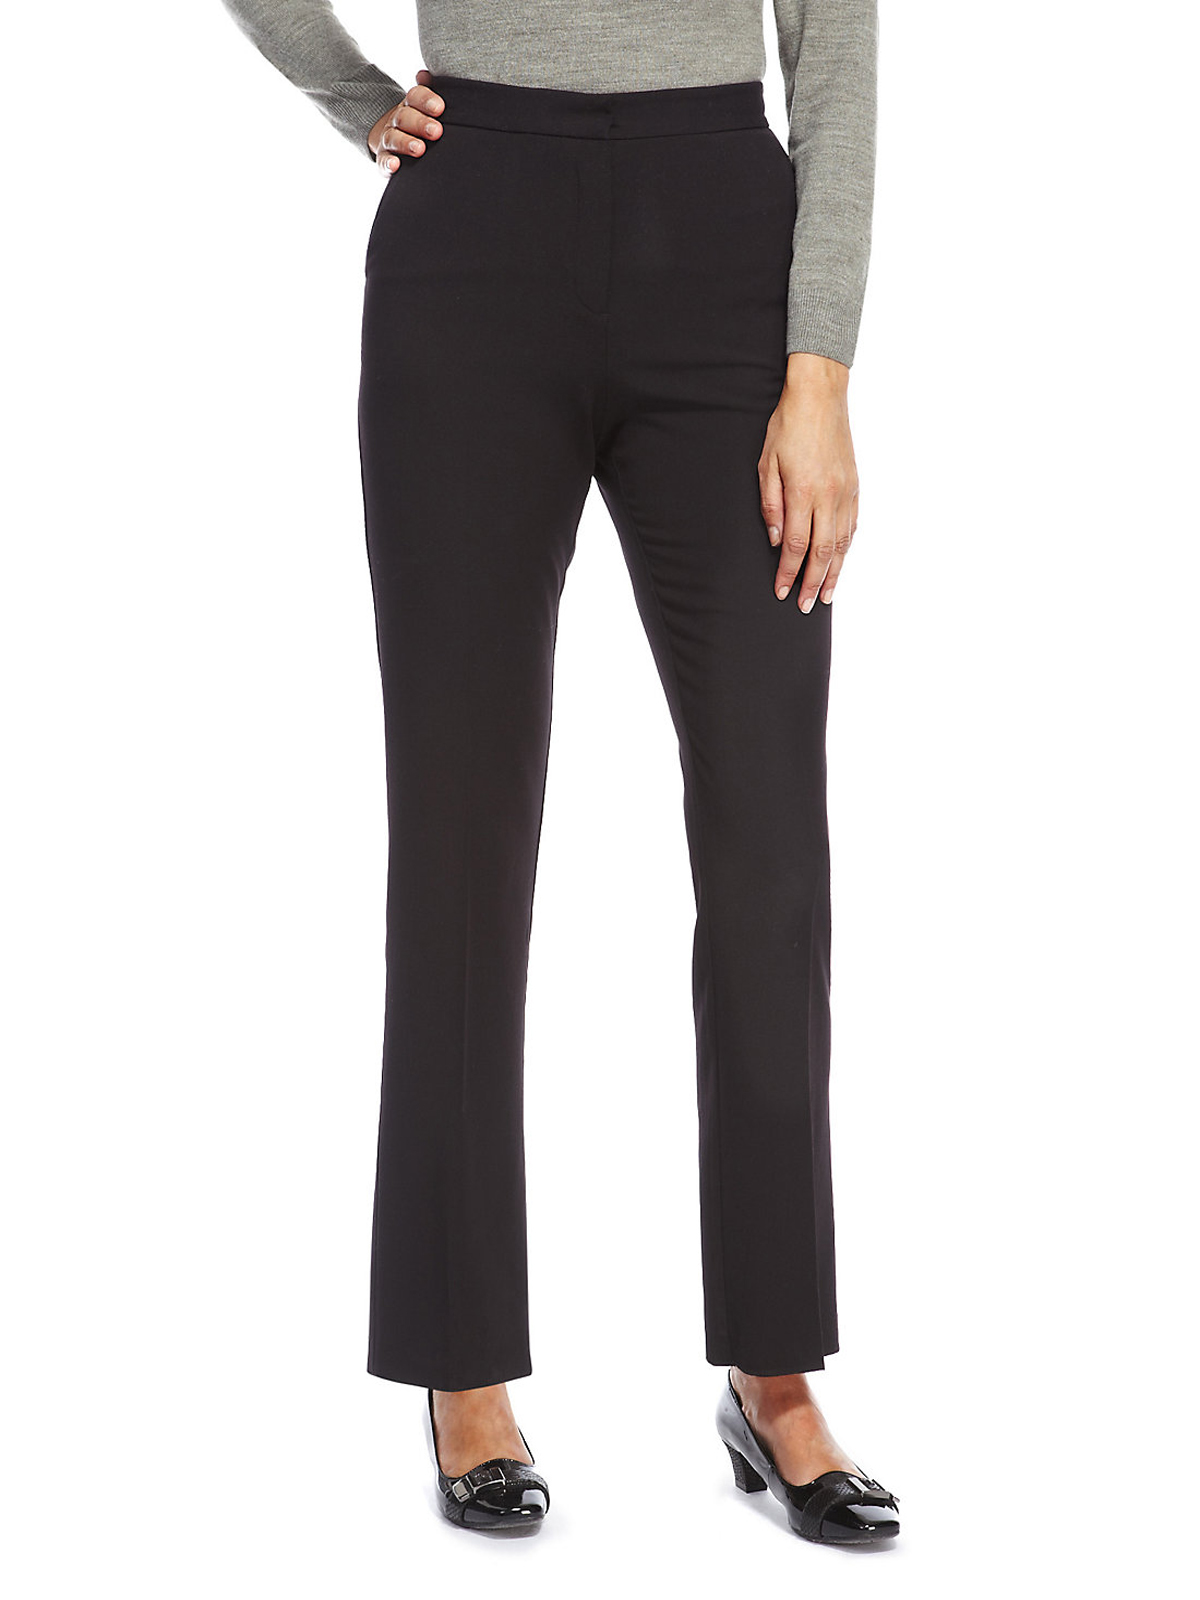 Marks and Spencer - - M&5 ASSORTED Ladies Trousers - Size 14 to 24